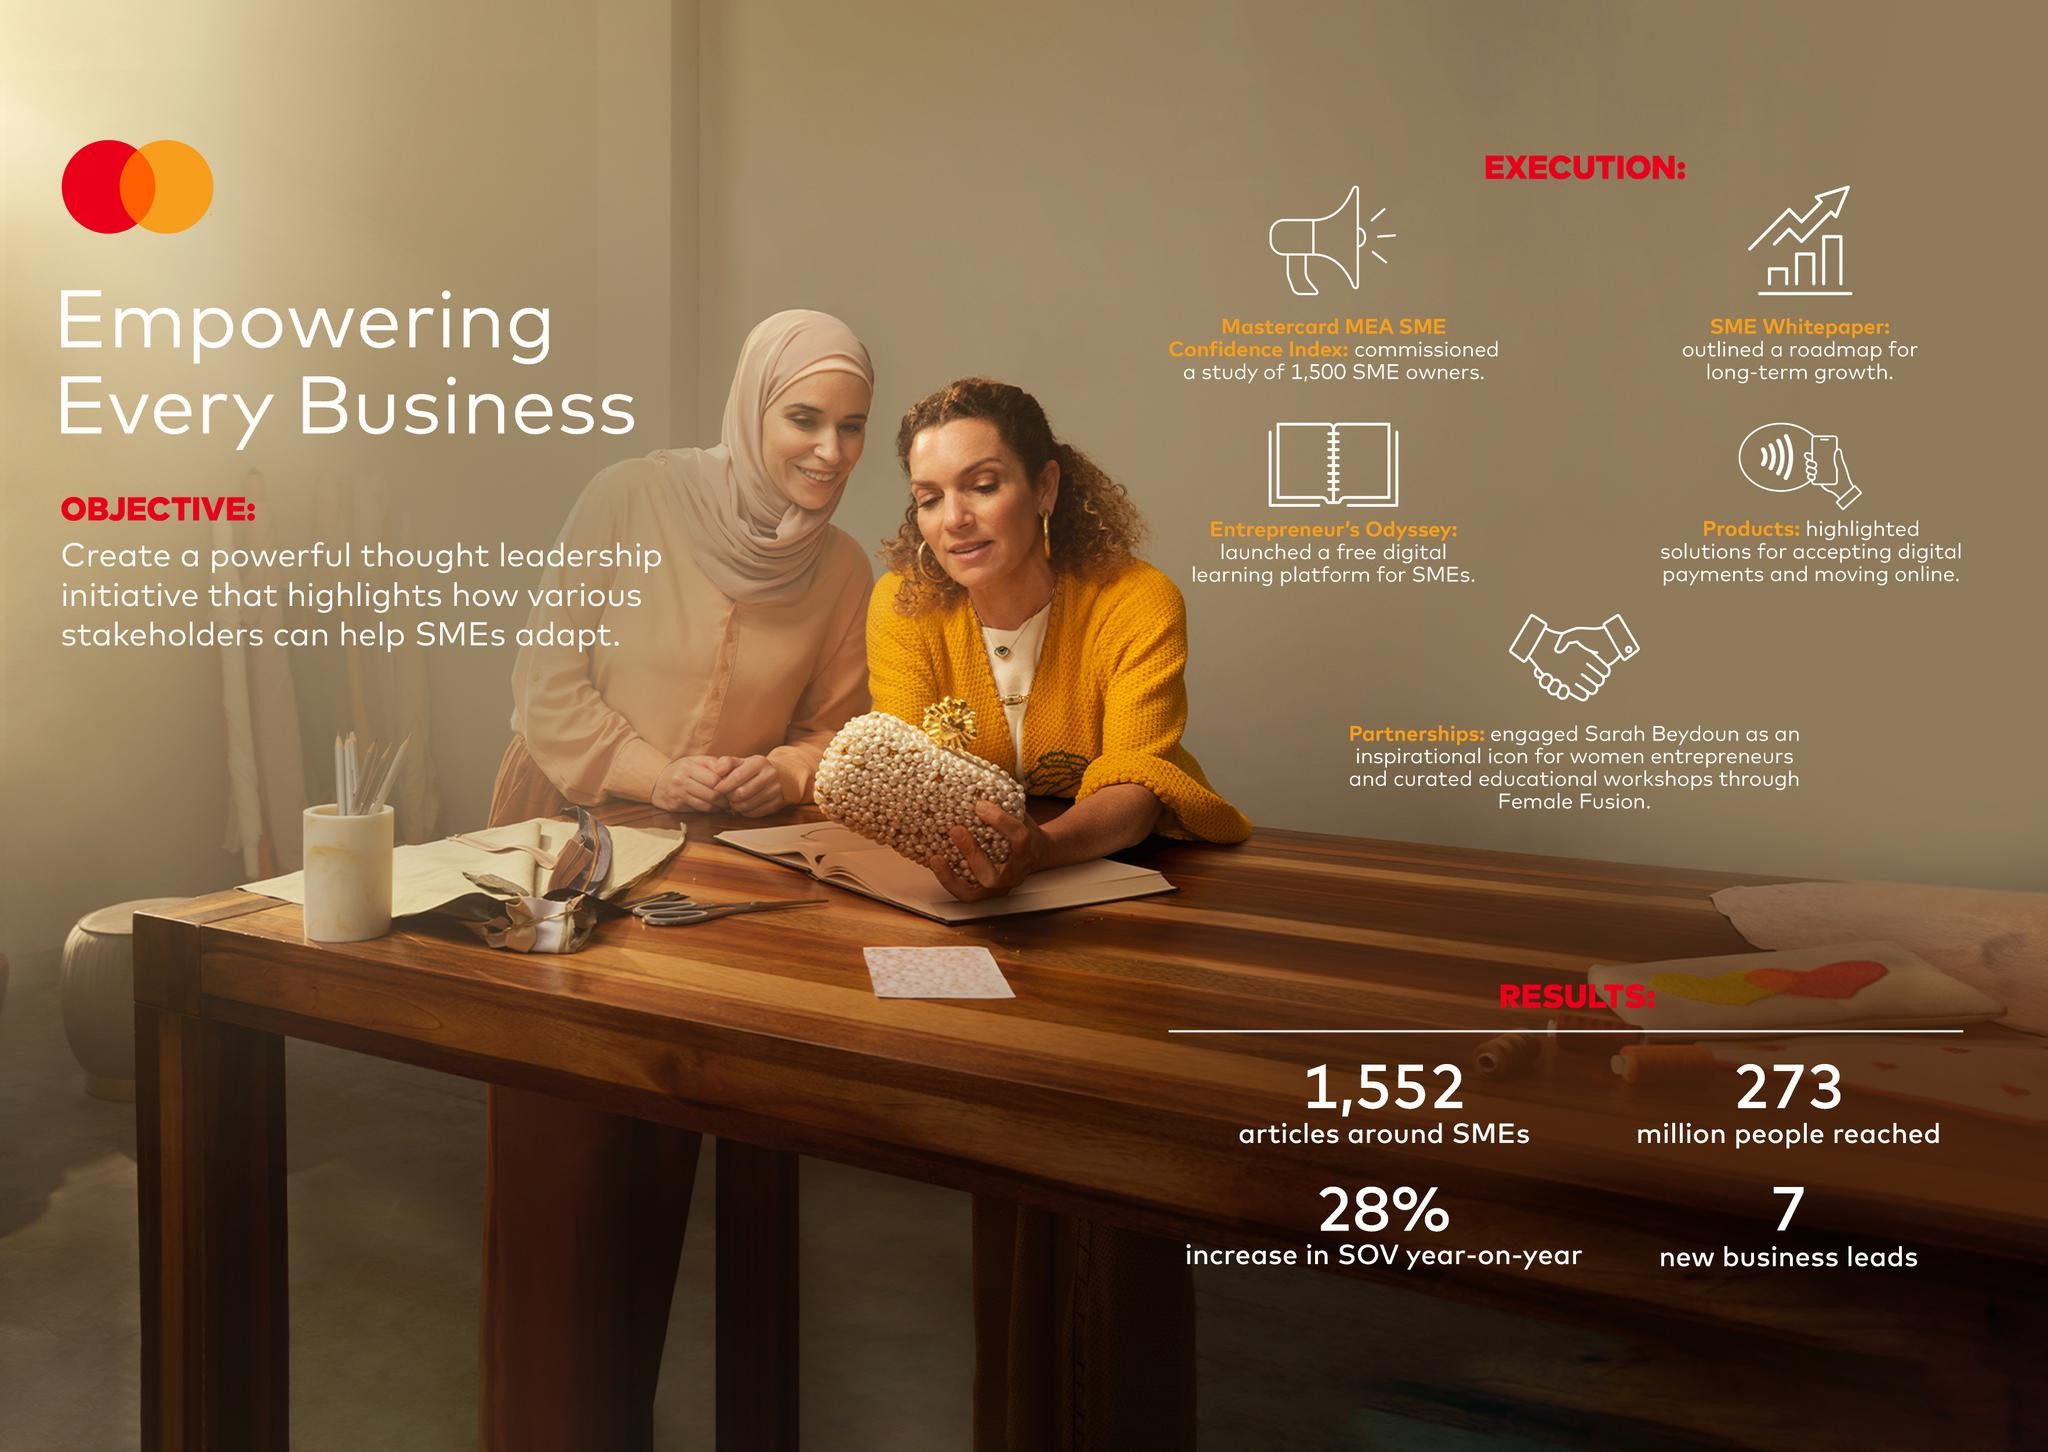 Mastercard: Empowering Every Business